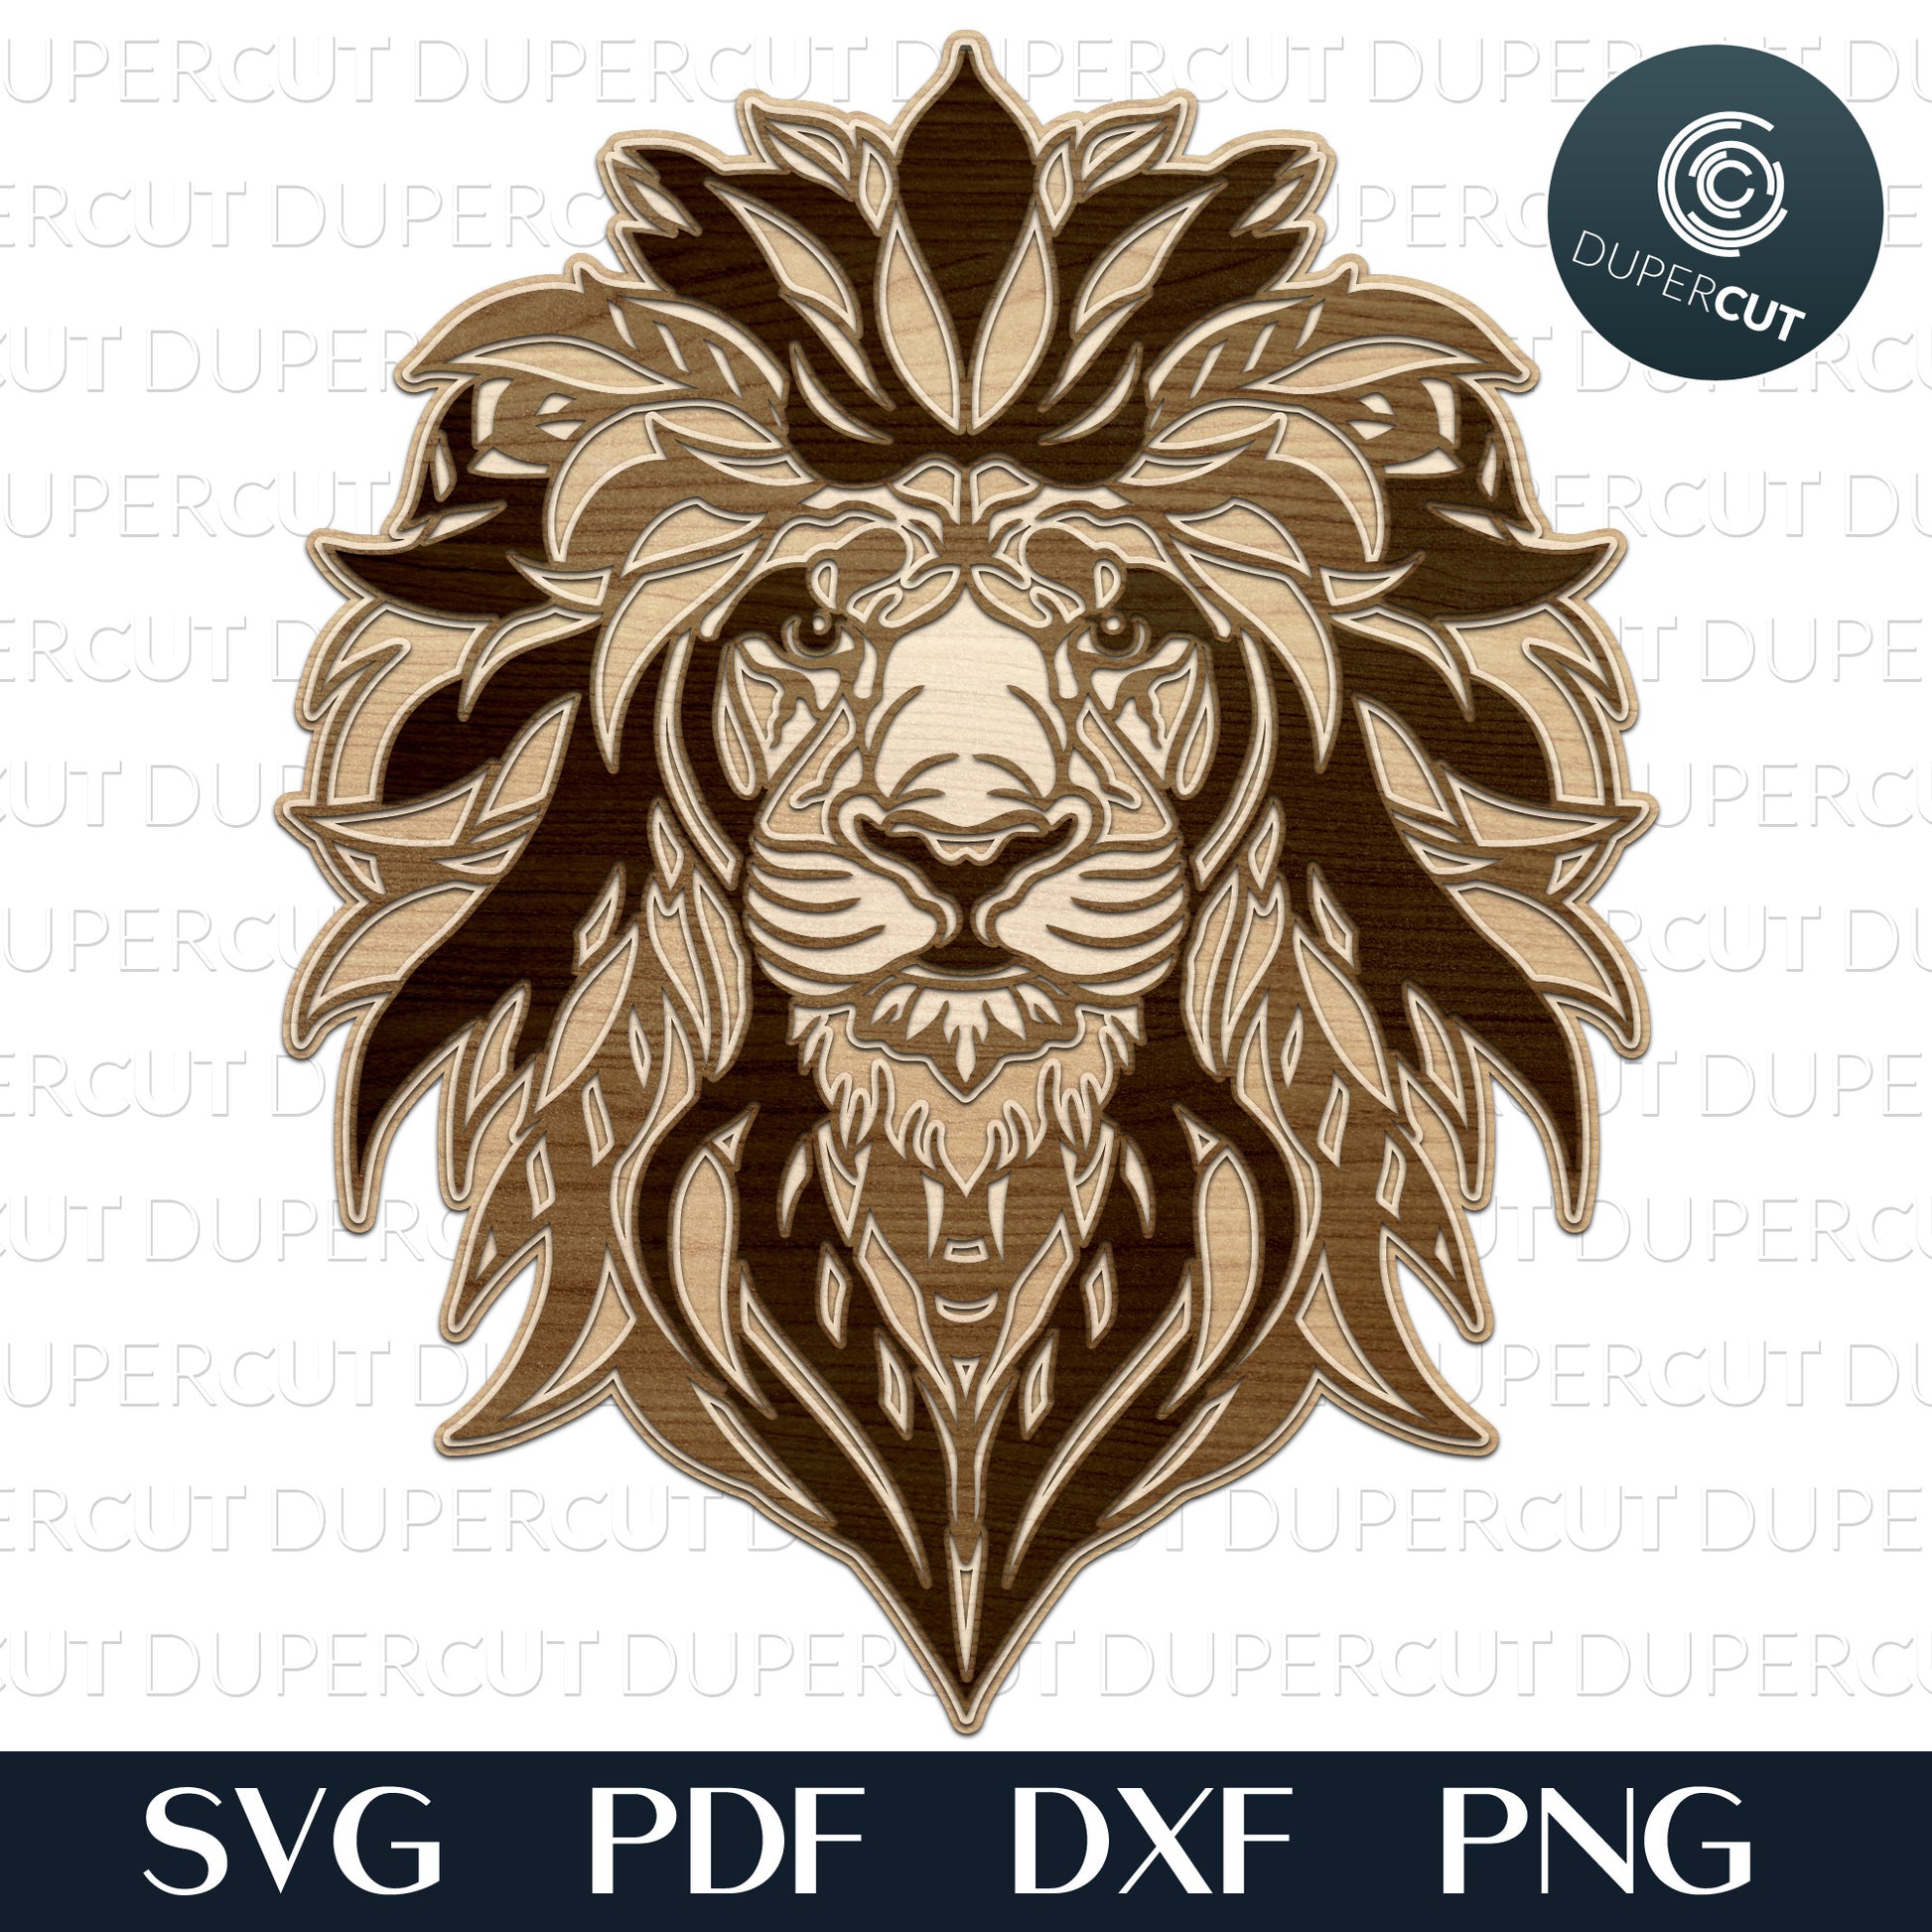 Zentangle Lion layered template, SVG PDF DXF files for cutting, laser engraving, scrapbooking. For use with Cricut, Glowforge, Silhouette, CNC machines.